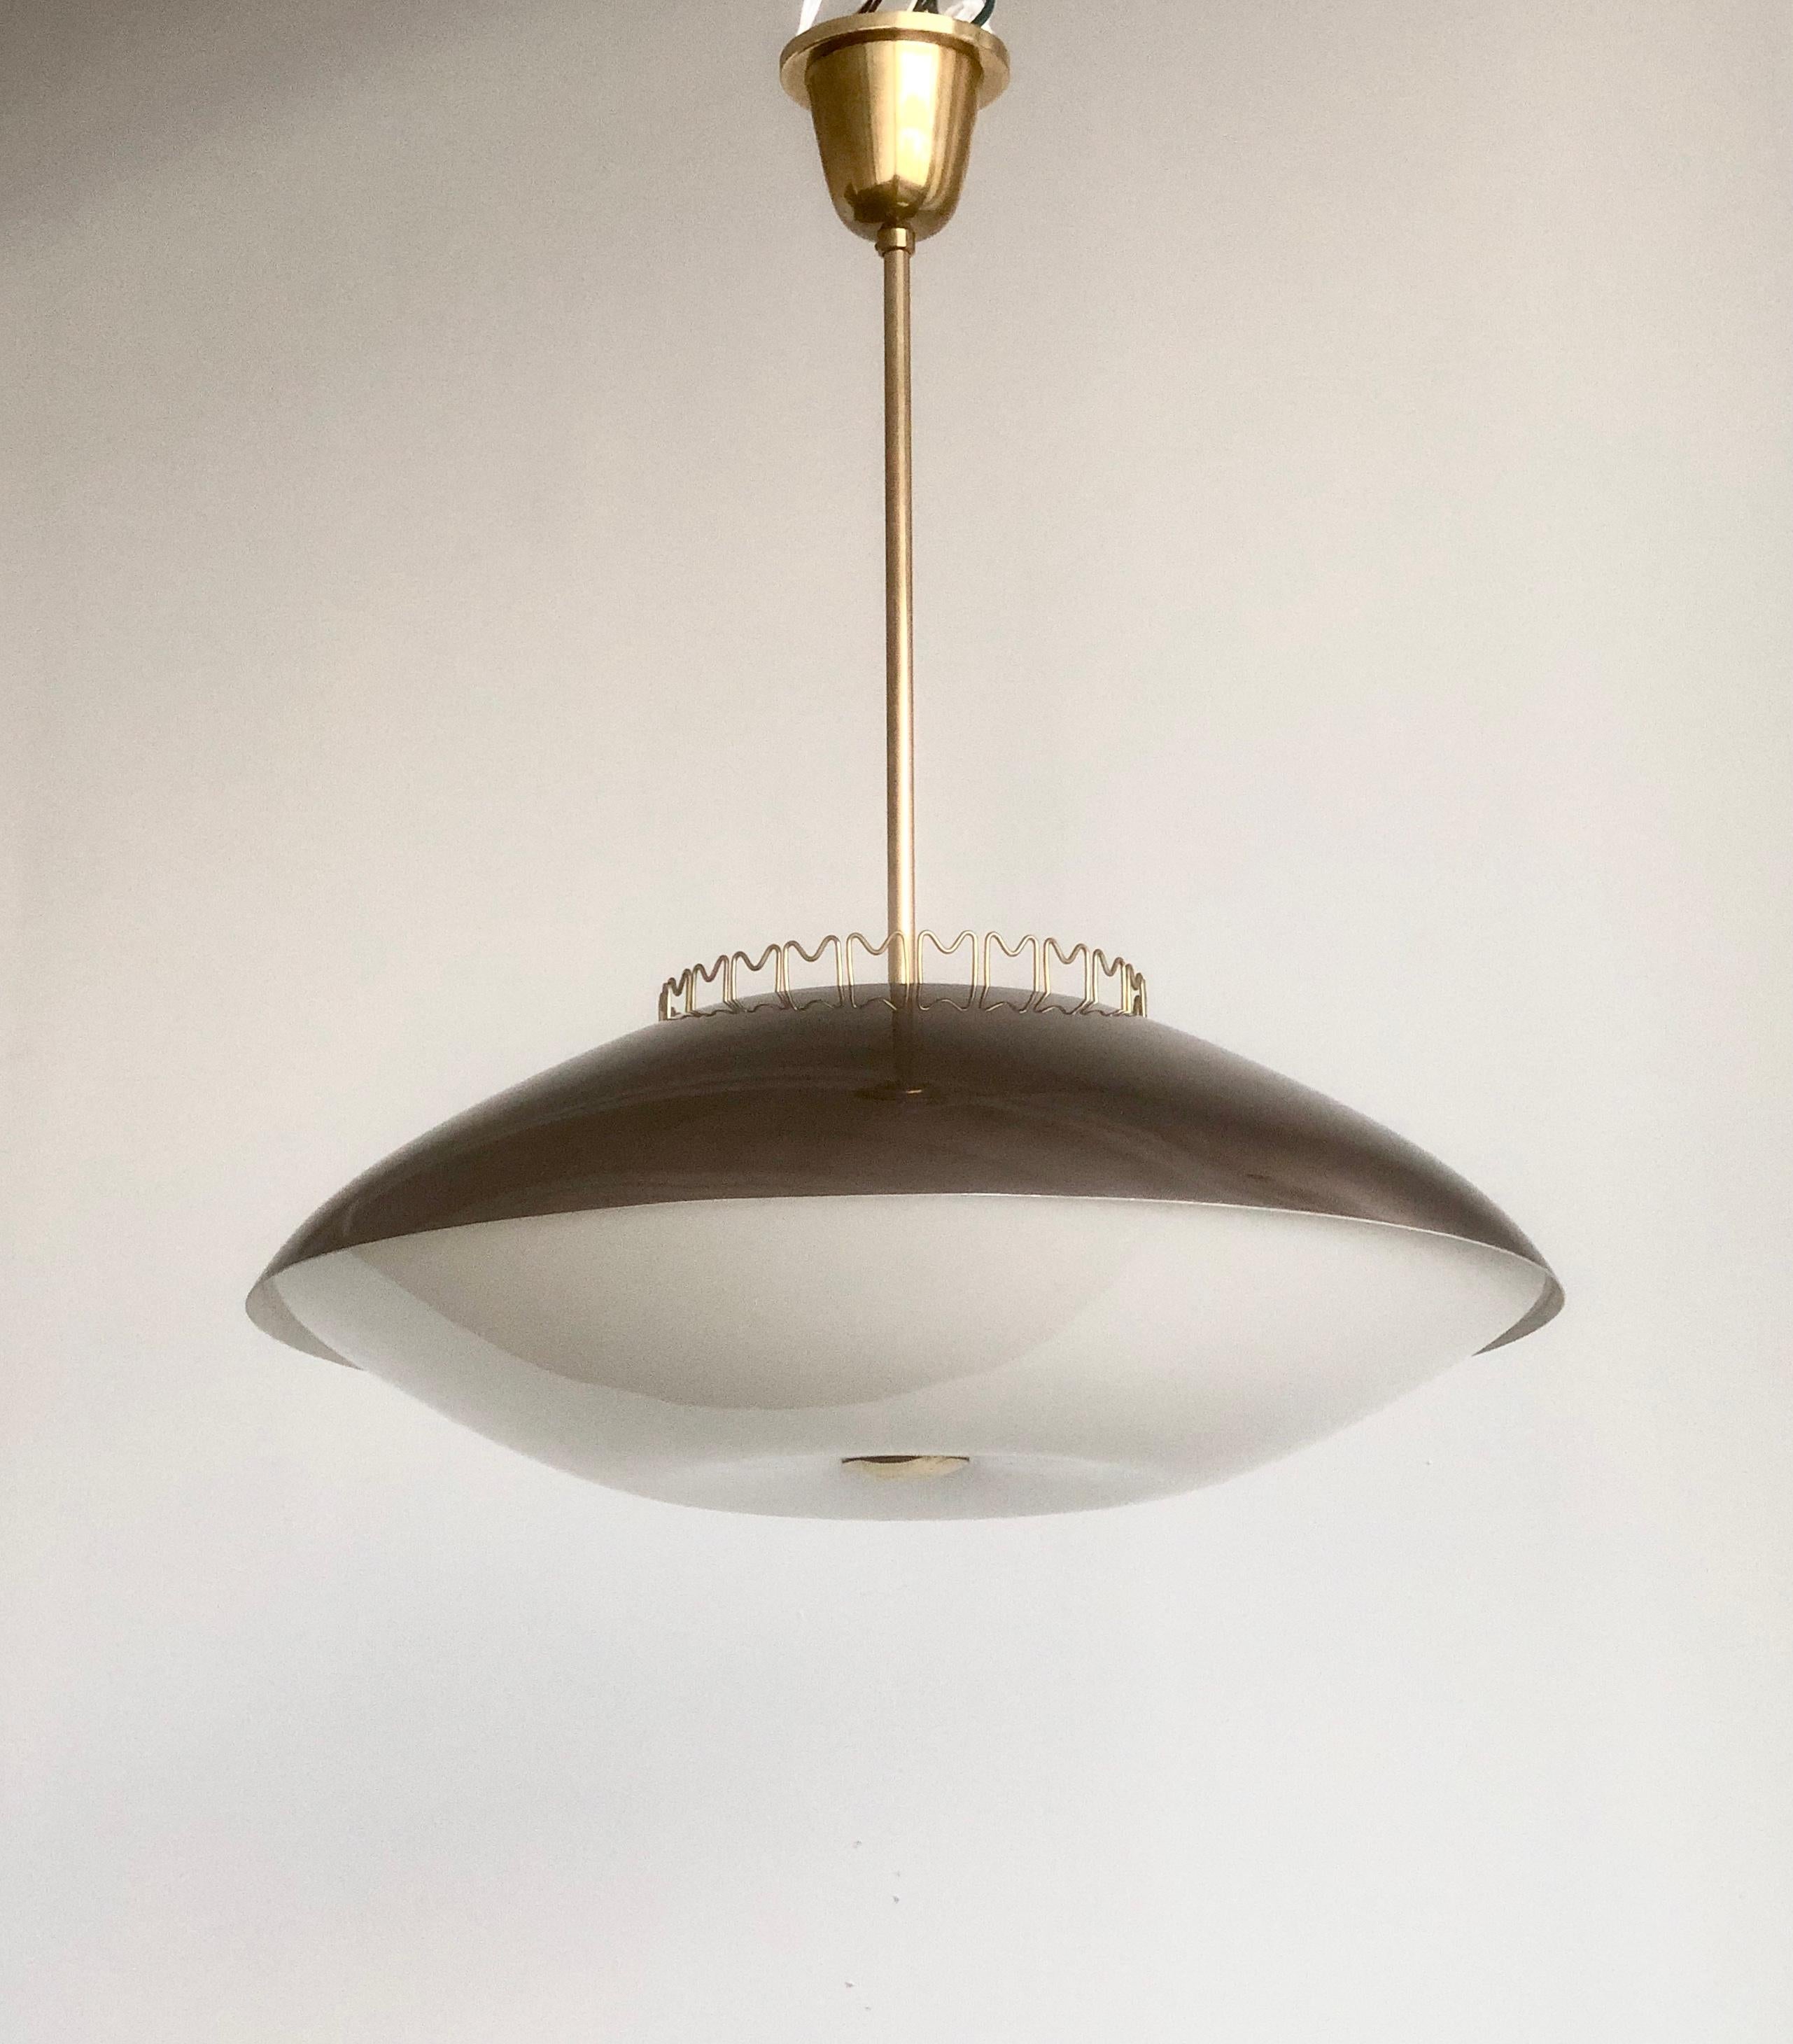 Large lighting pendant designed by Lisa Johansson-Pape (1907- 1989) for Orno Oy, Finland. Circa 1950th. Stamped 